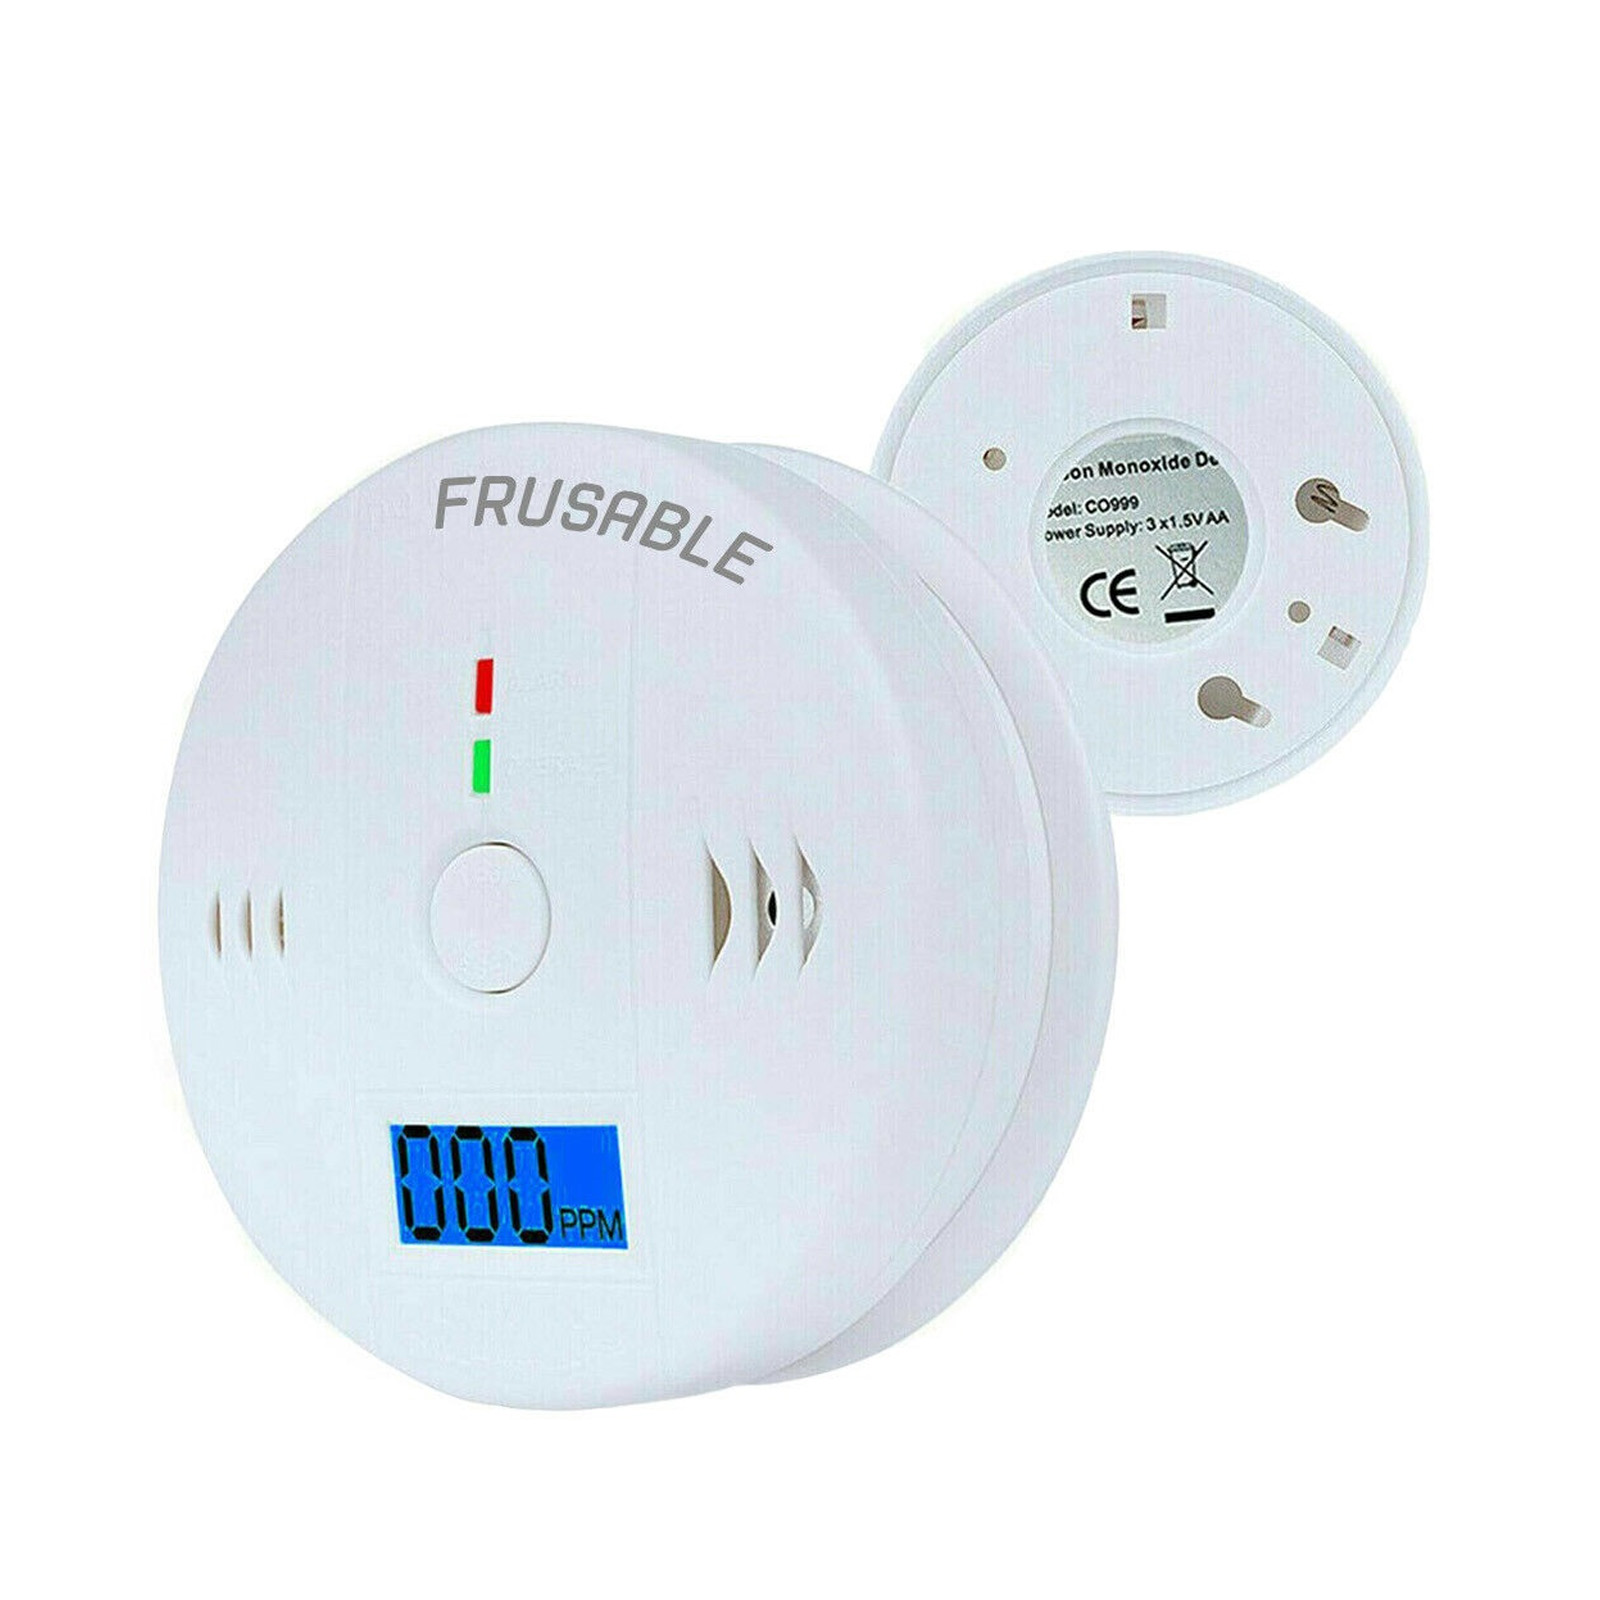 Co Carbon Monoxide Gas Detector Alarm Lcd Display Battery Powered